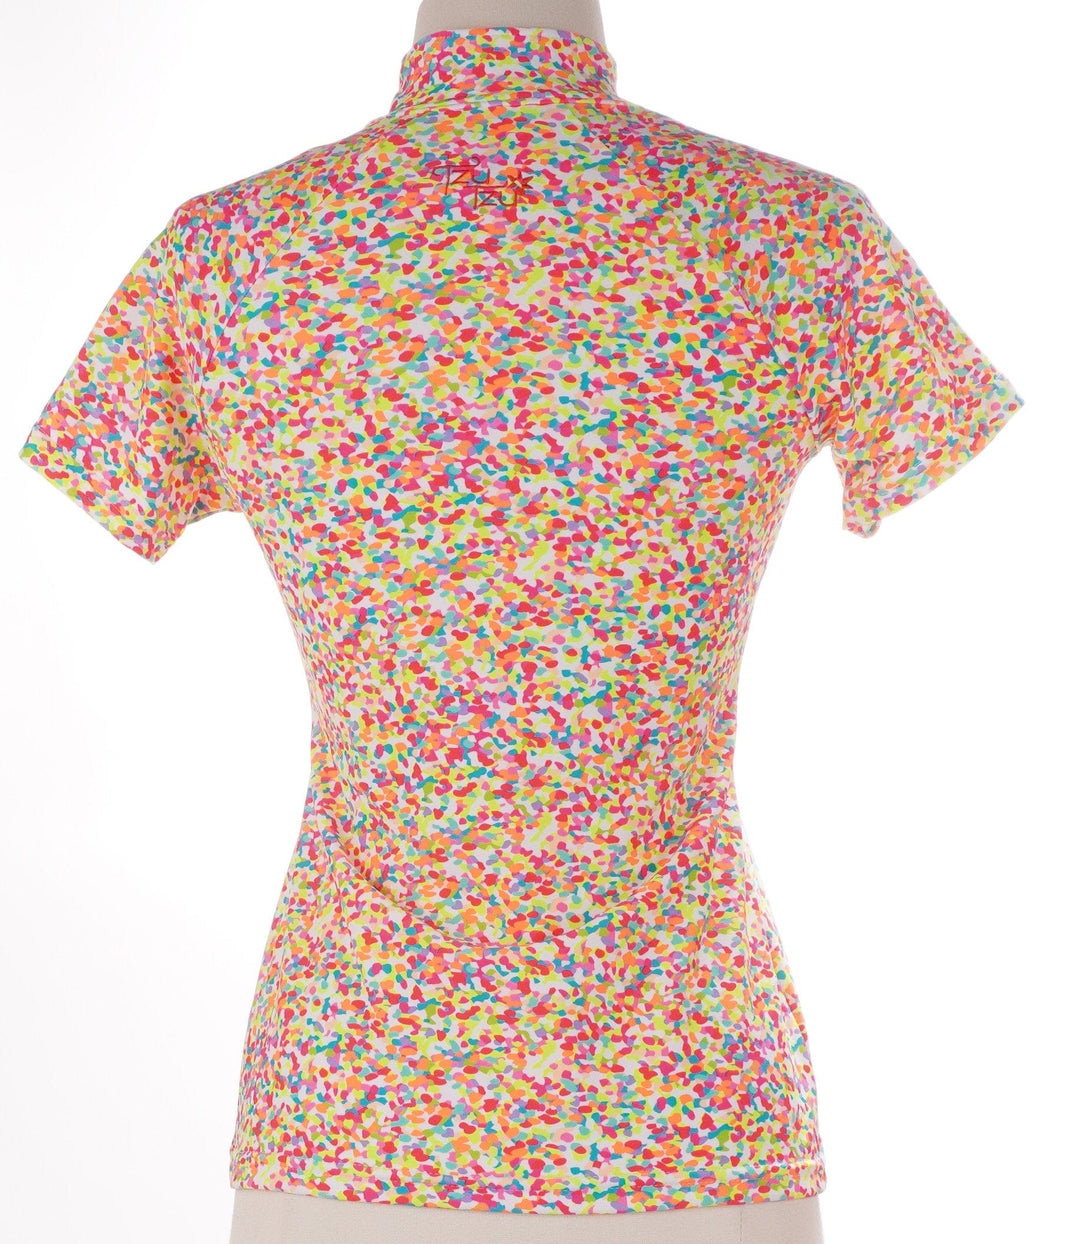 Tzu Tzu Multicolored / X-Small / Exclusive New Product Tzu Tzu Lucy Short Sleeve Top - Sprinkles - Size X-Small